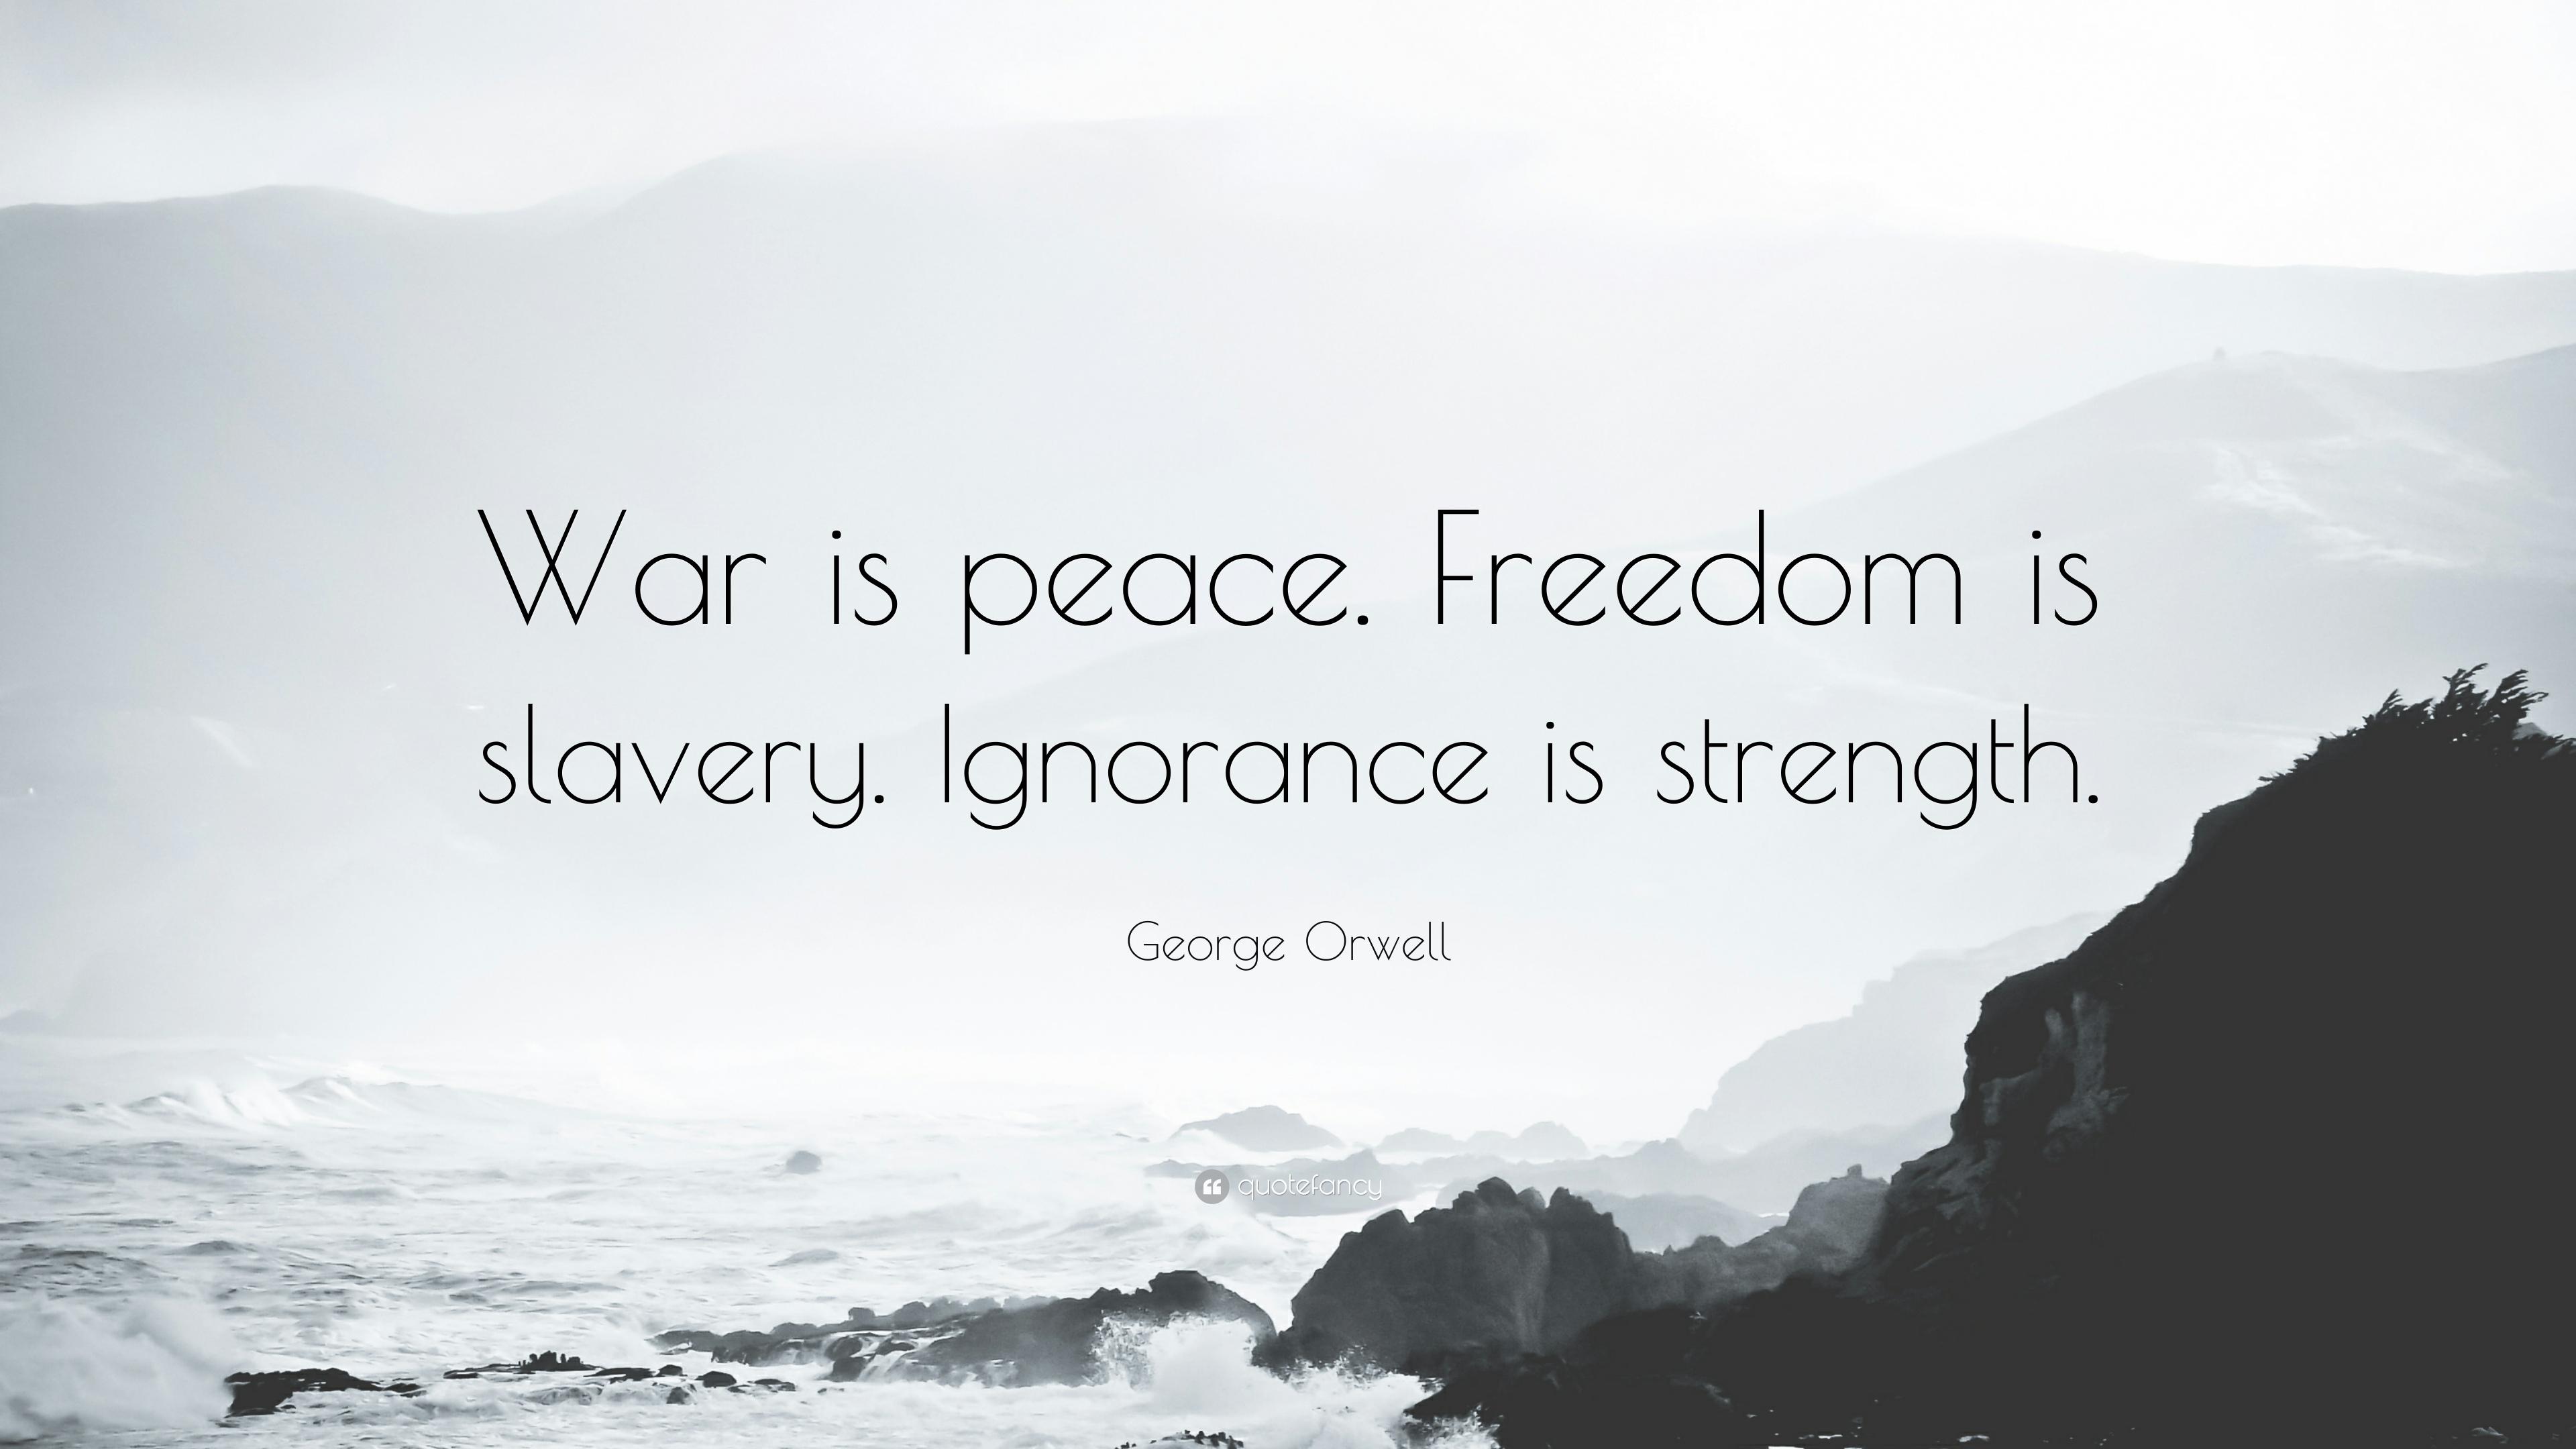 George Orwell Quote: “War is peace. Freedom is slavery. Ignorance is